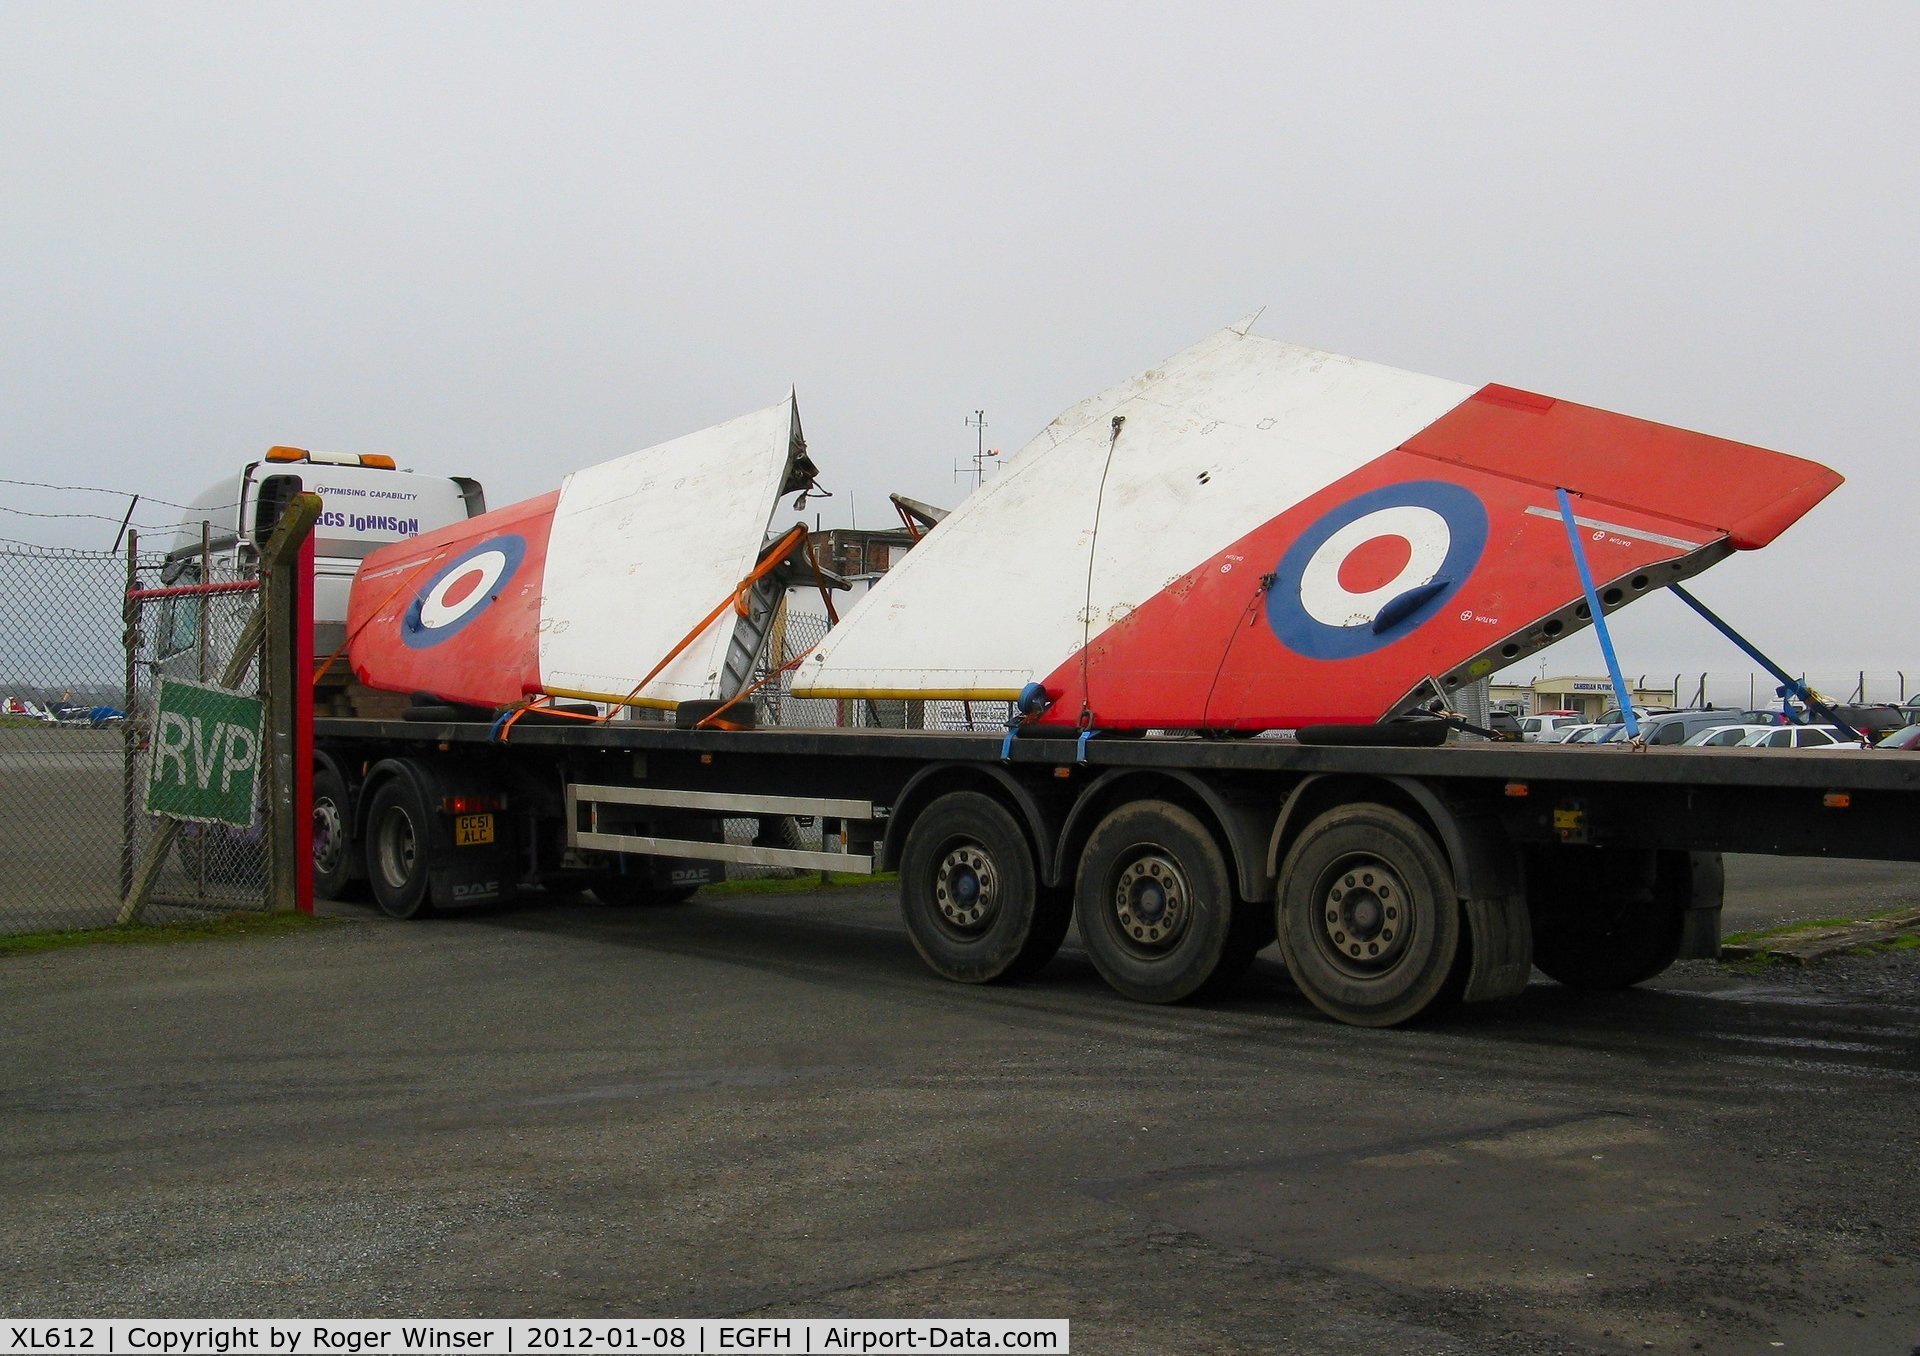 XL612, 1958 Hawker Hunter T.7 C/N 41H-695346, The wings of the former ETPS Hawker Hunter transported from Exeter Airport to Swansea Airport on 8th January 2012.